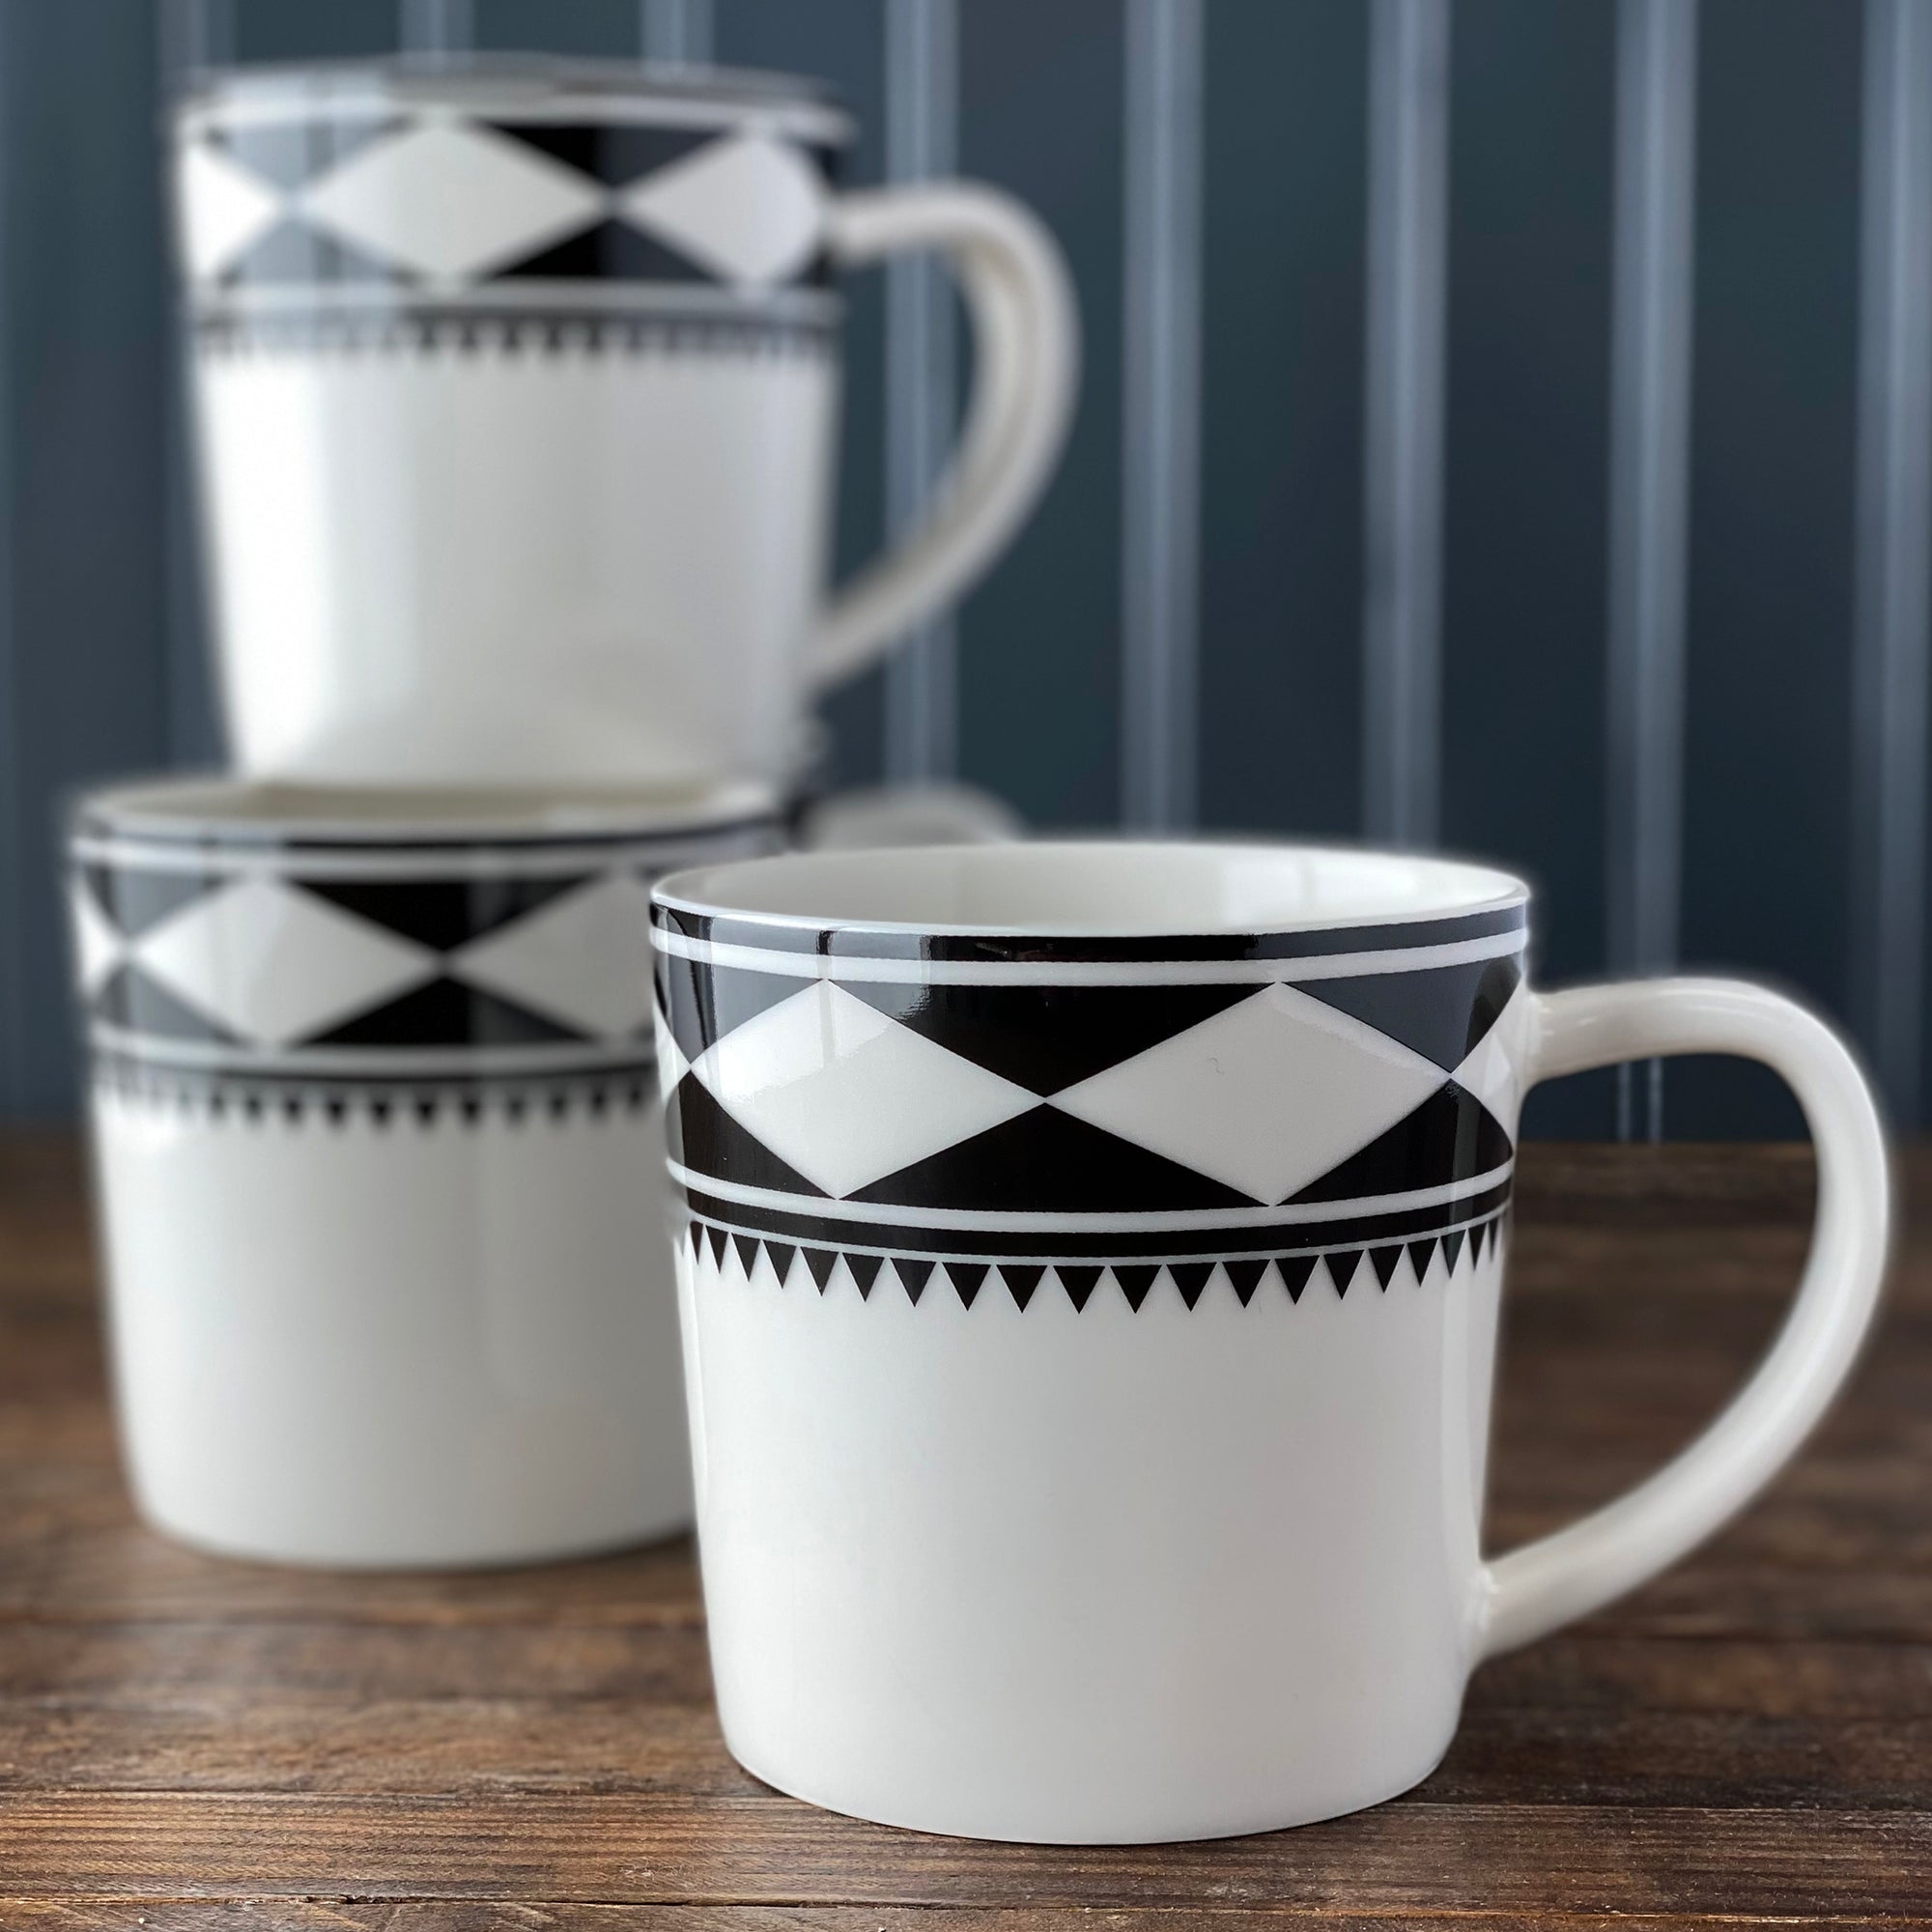 Fez Mug by Caskata Artisanal Home made of high-fired porcelain with black geometric patterns including diamonds and triangles near the rim. Dishwasher and microwave safe.